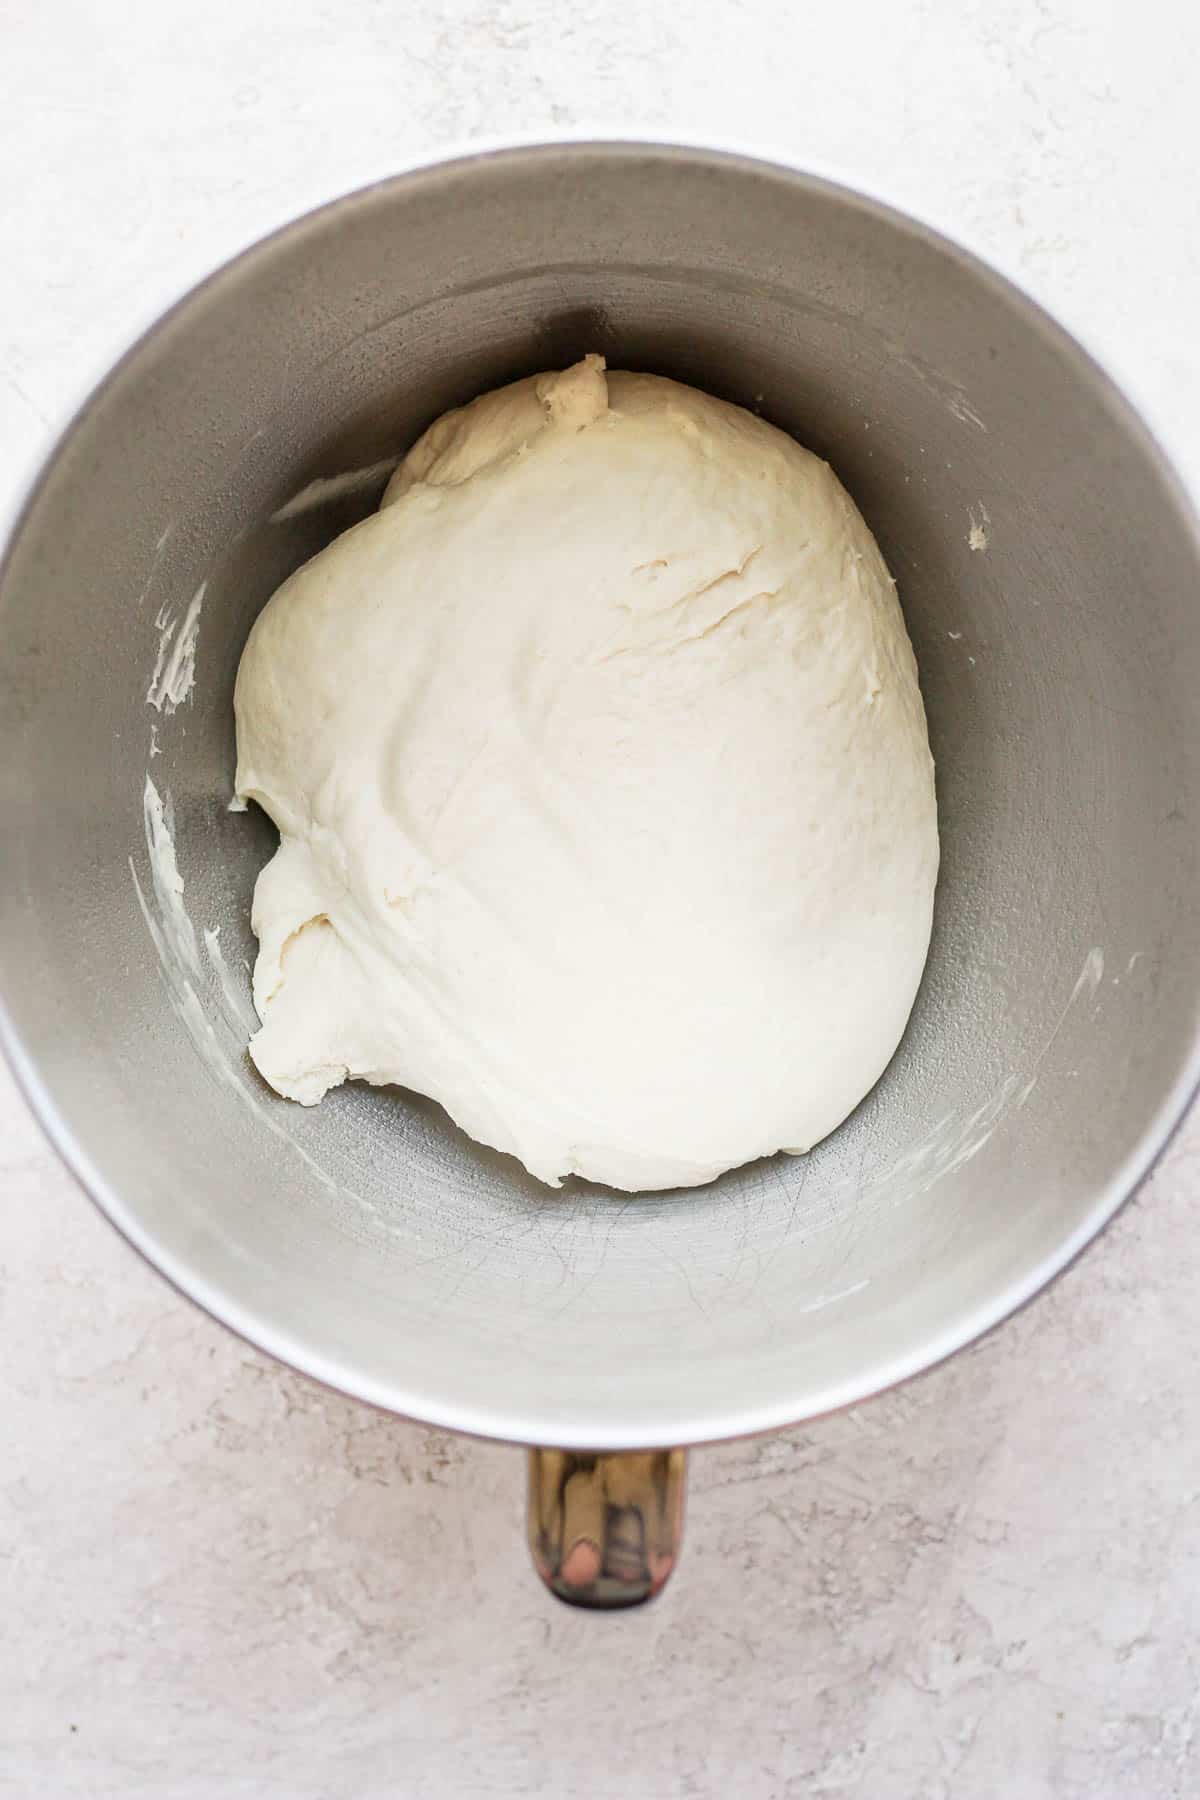 Combine pizza dough in a metal bowl.